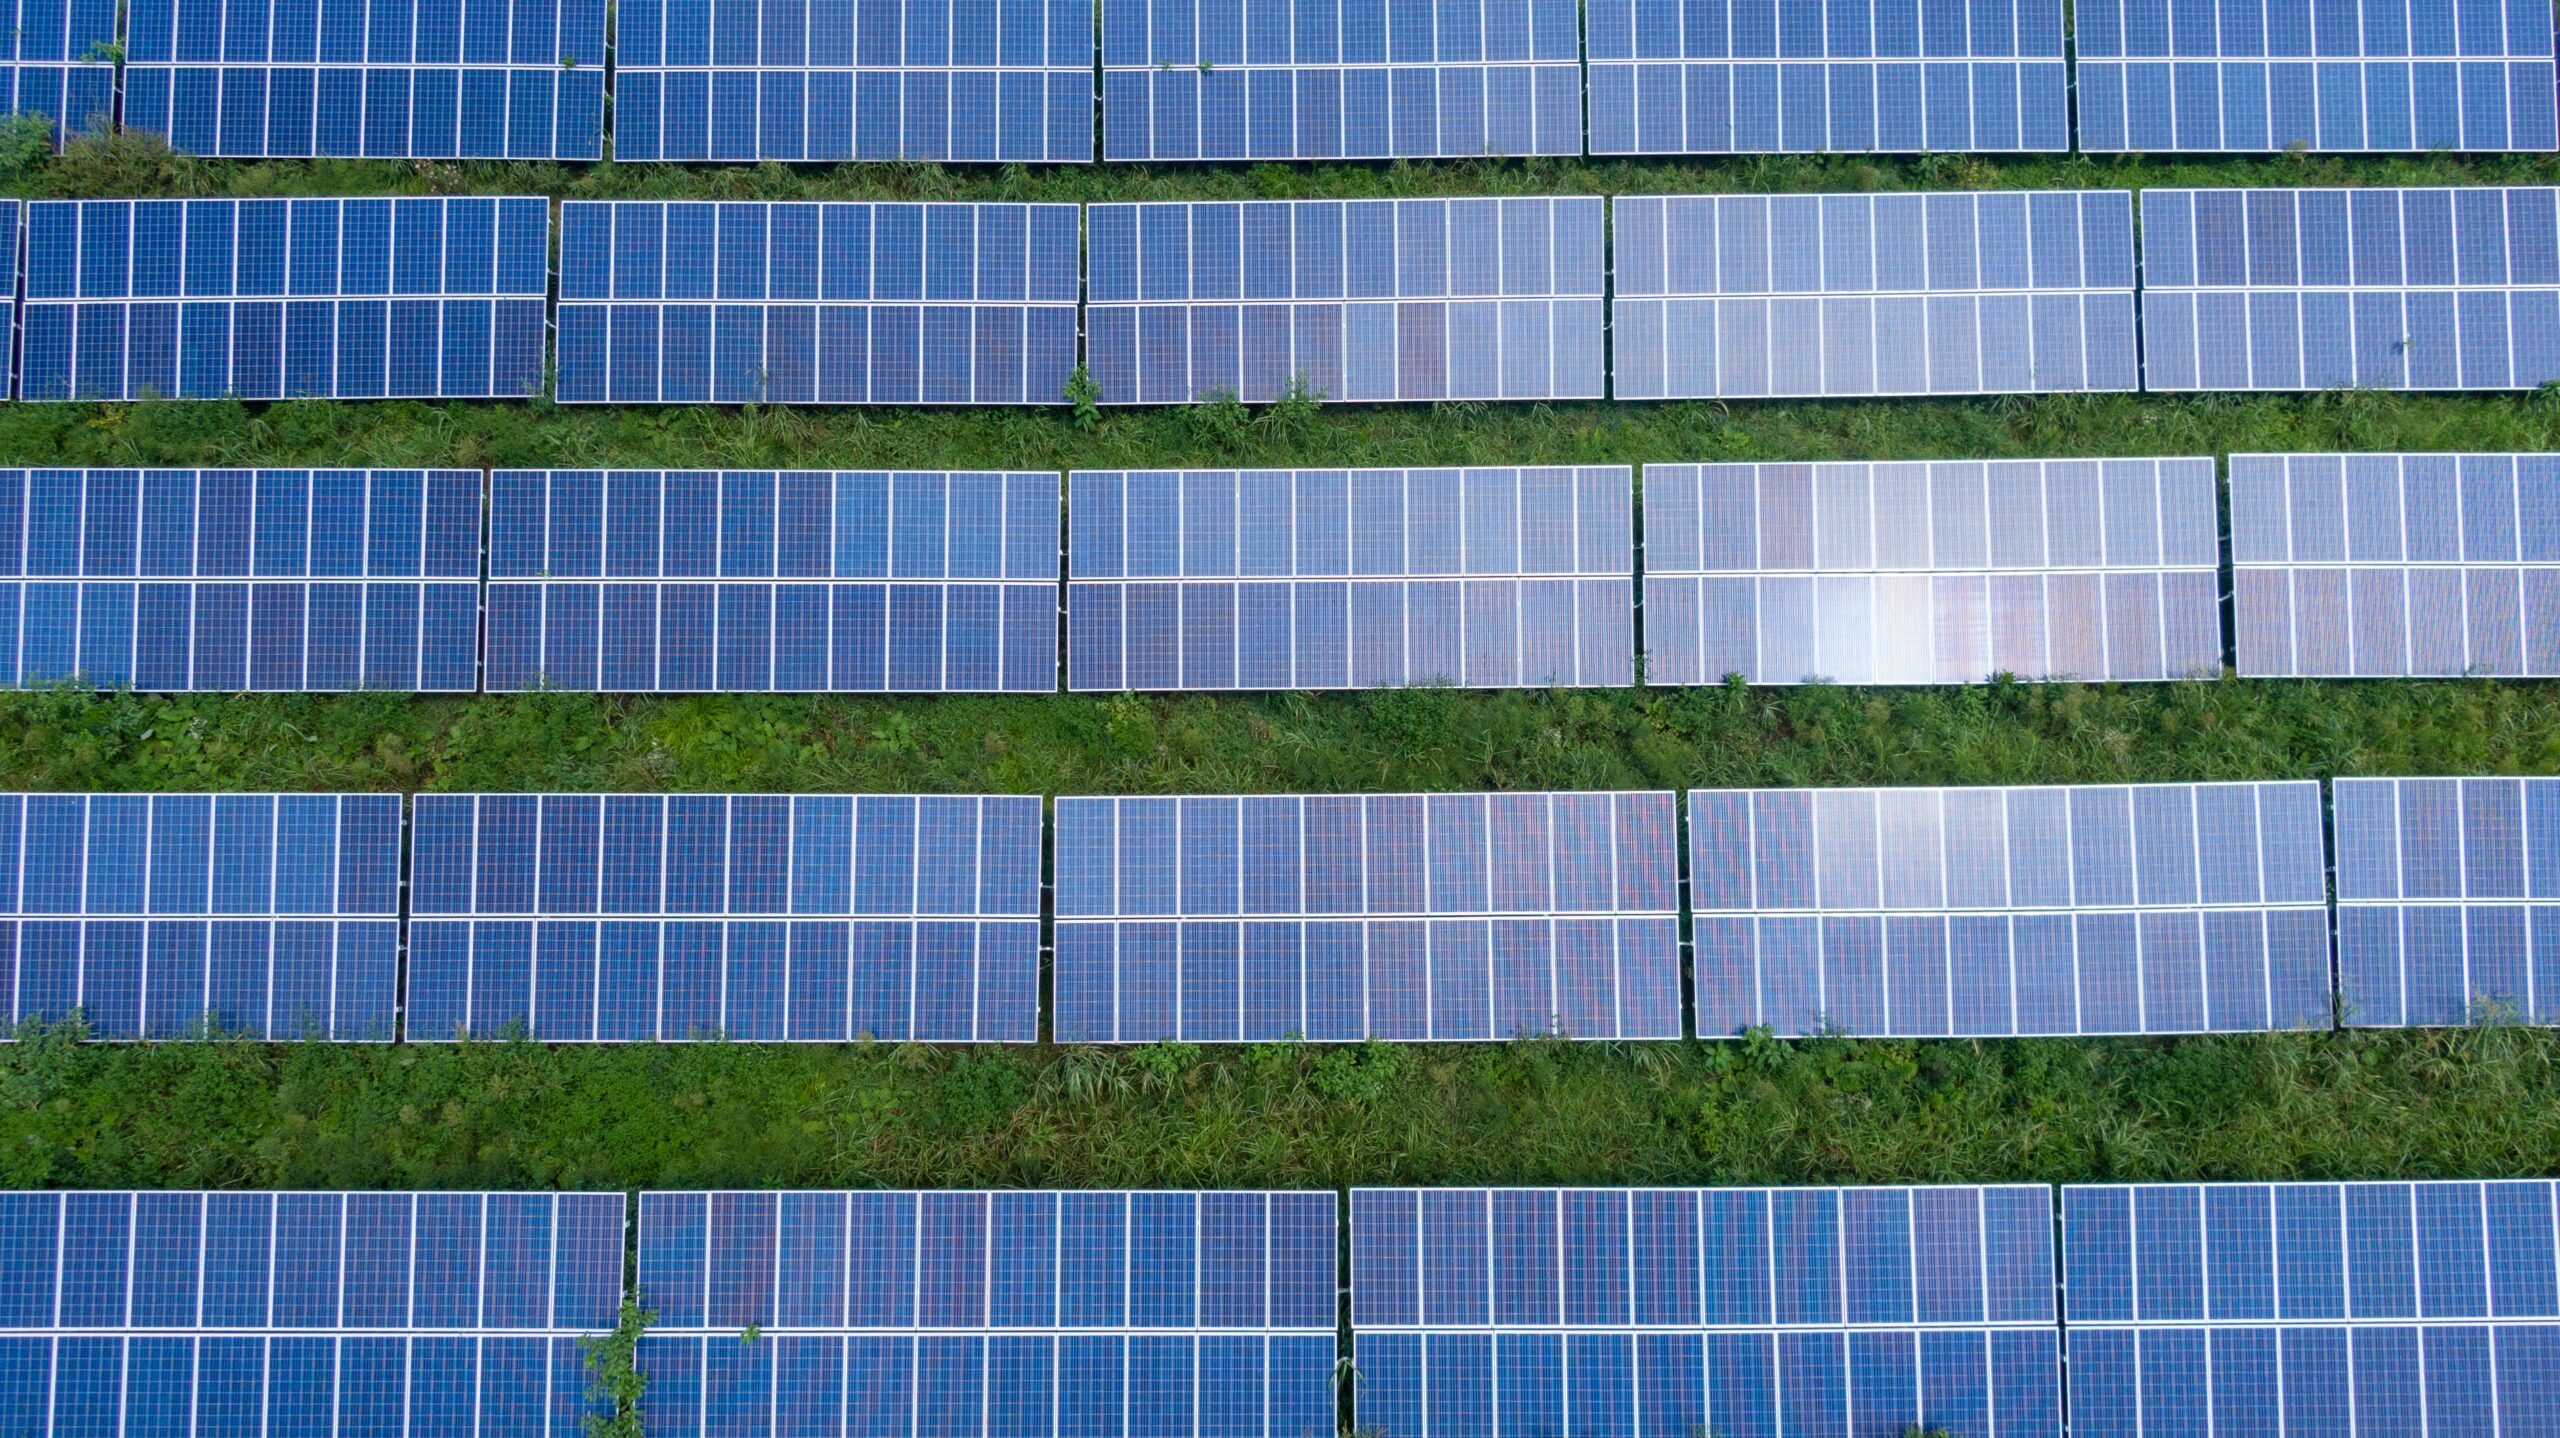 A solar power grid. Photo by: Kelly Lacy / Pexels.com